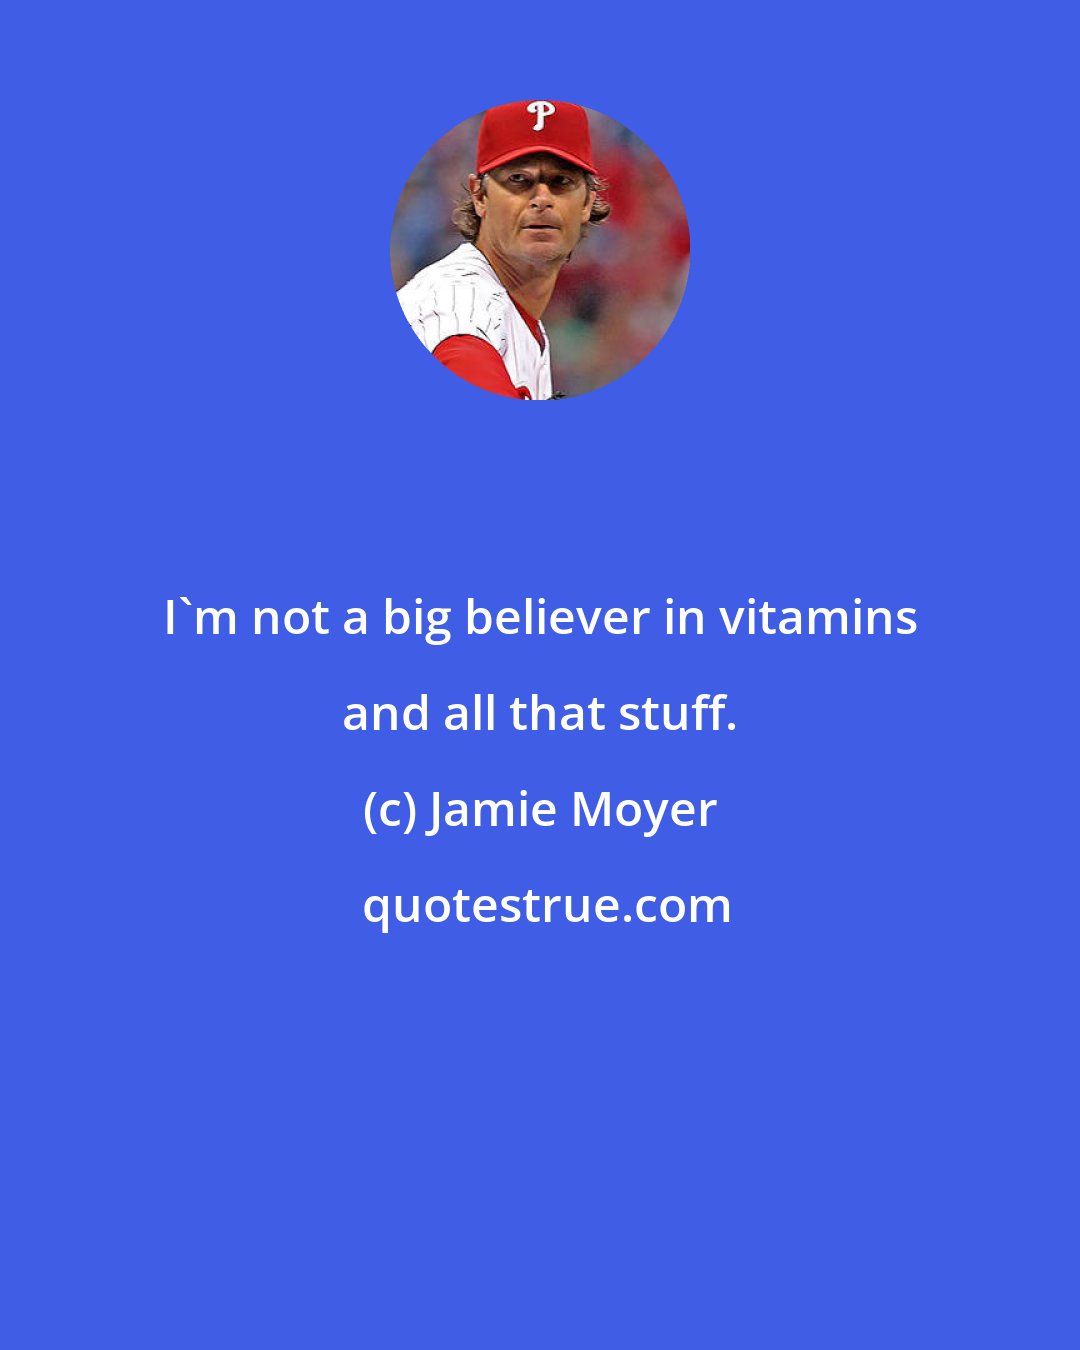 Jamie Moyer: I'm not a big believer in vitamins and all that stuff.